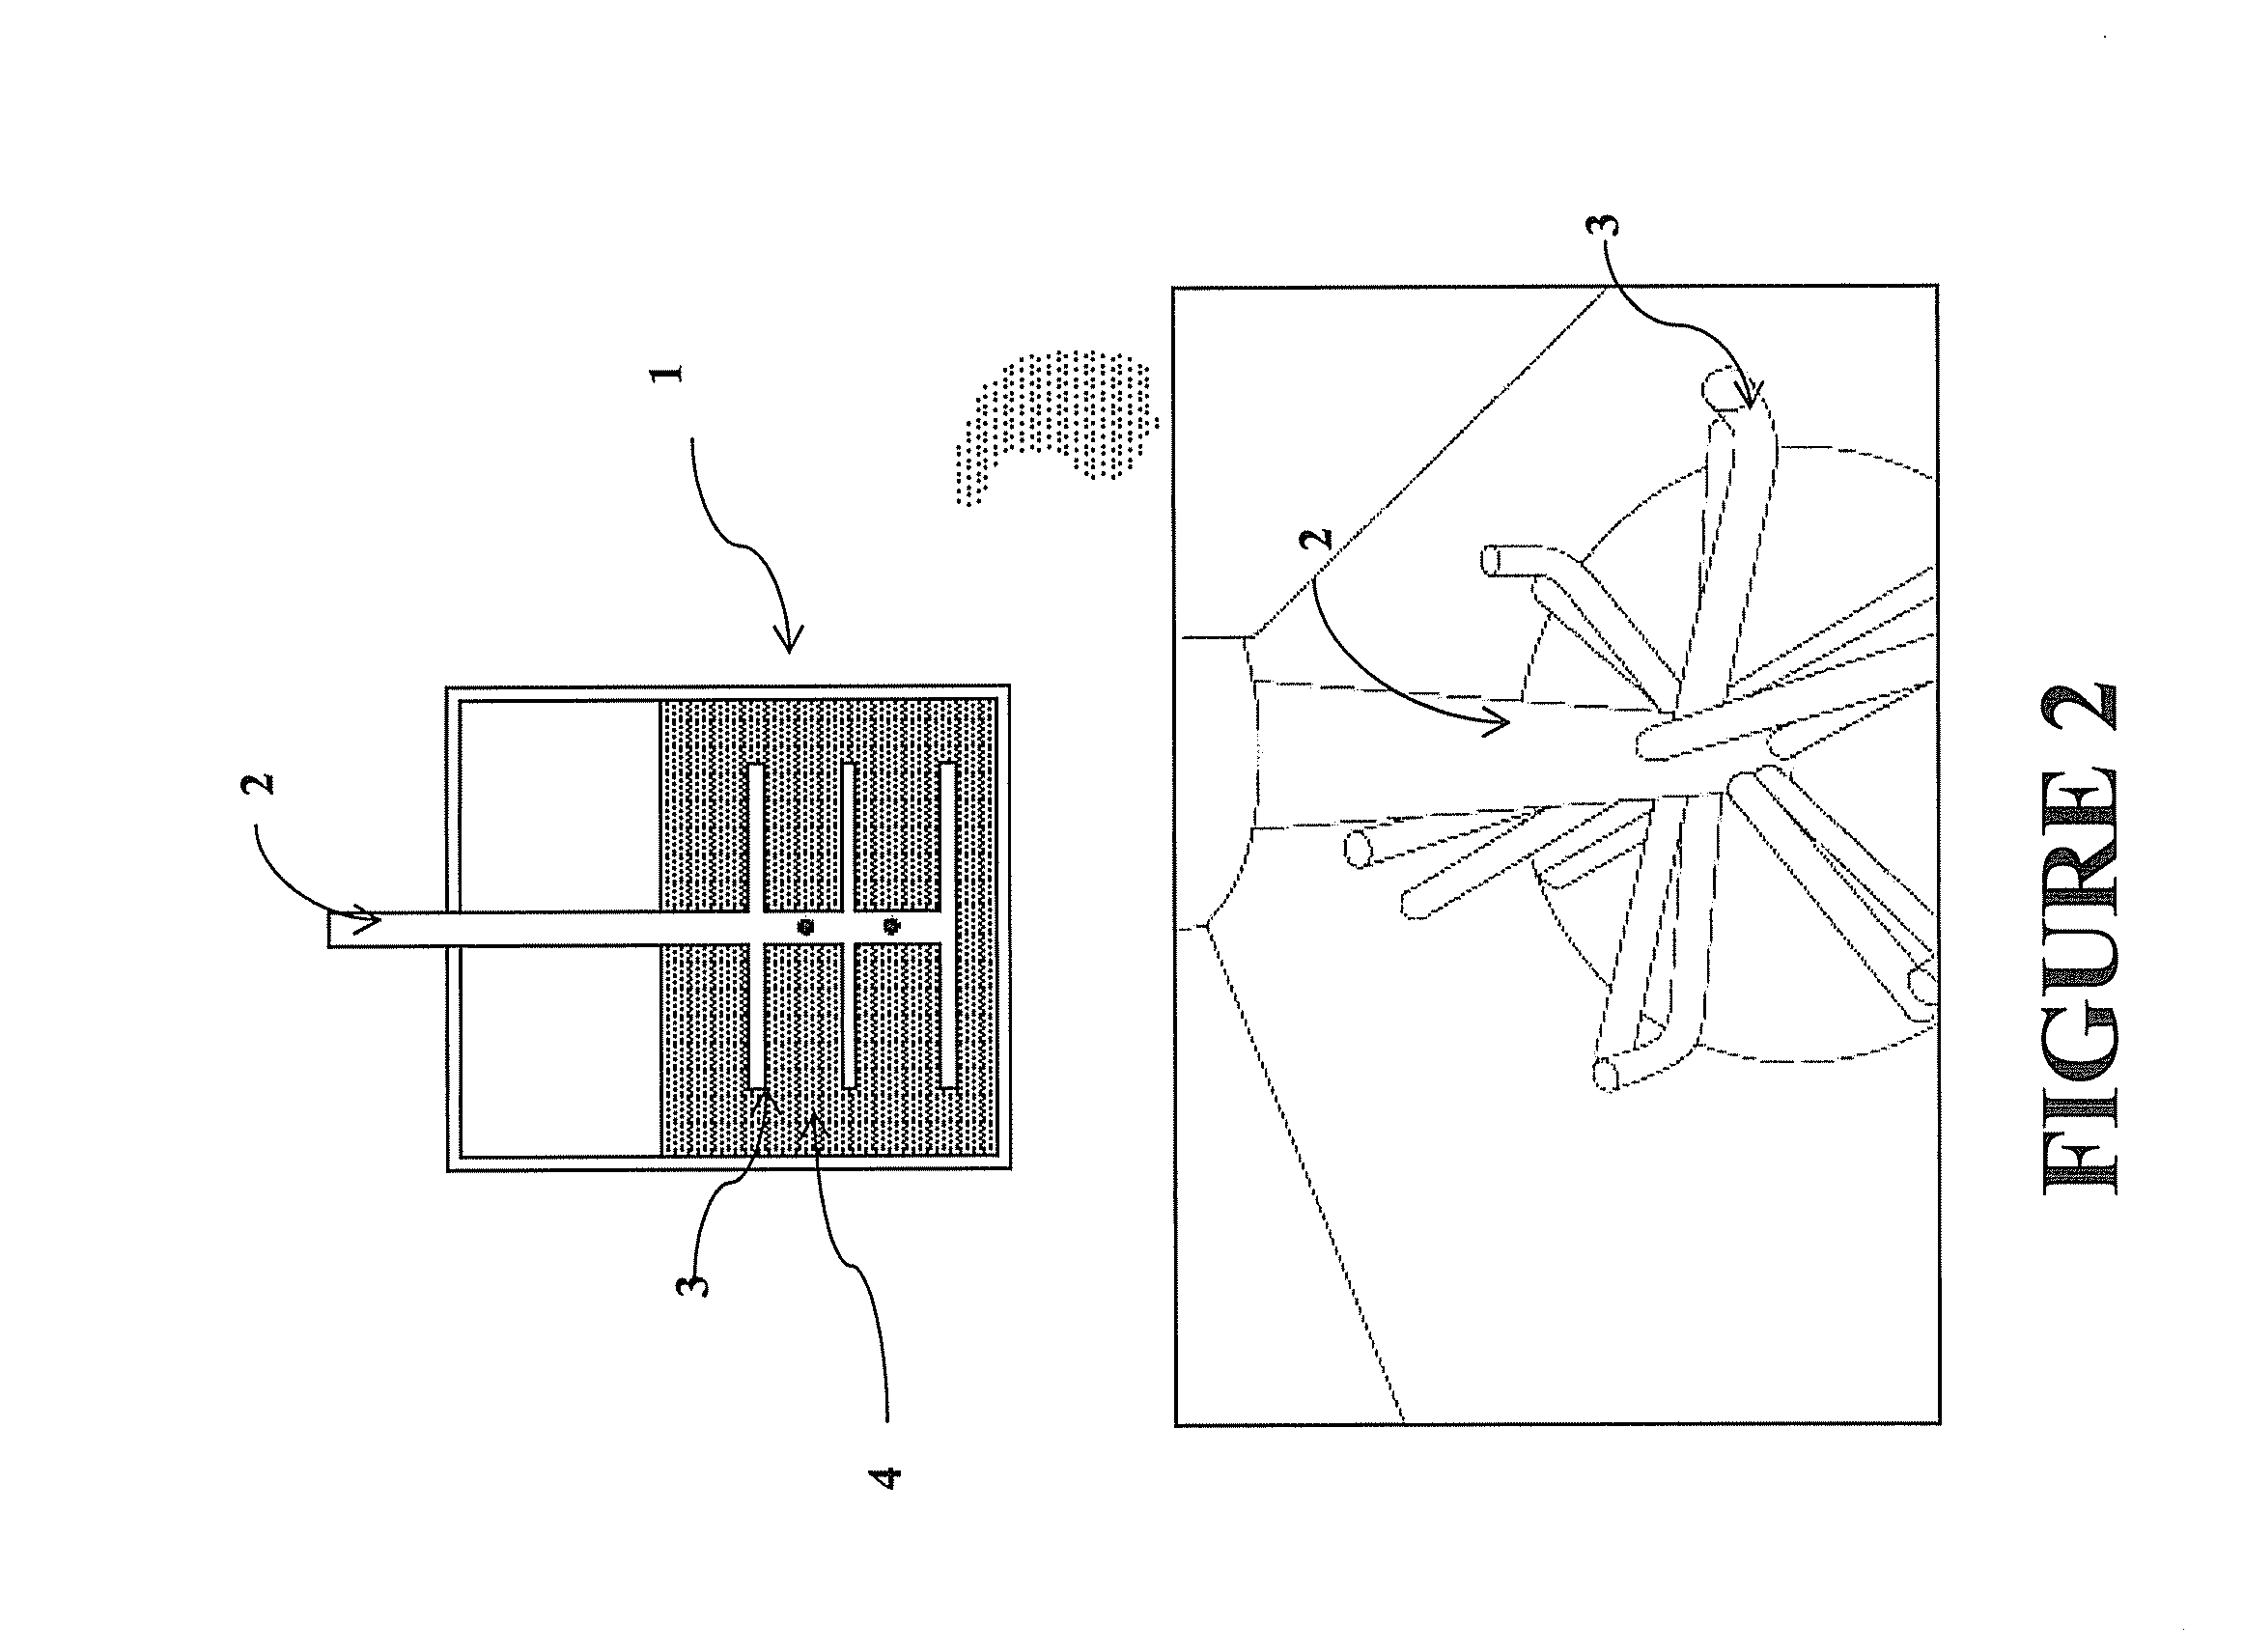 System and method for manufacturing asphalt products with recycled asphalt shingles